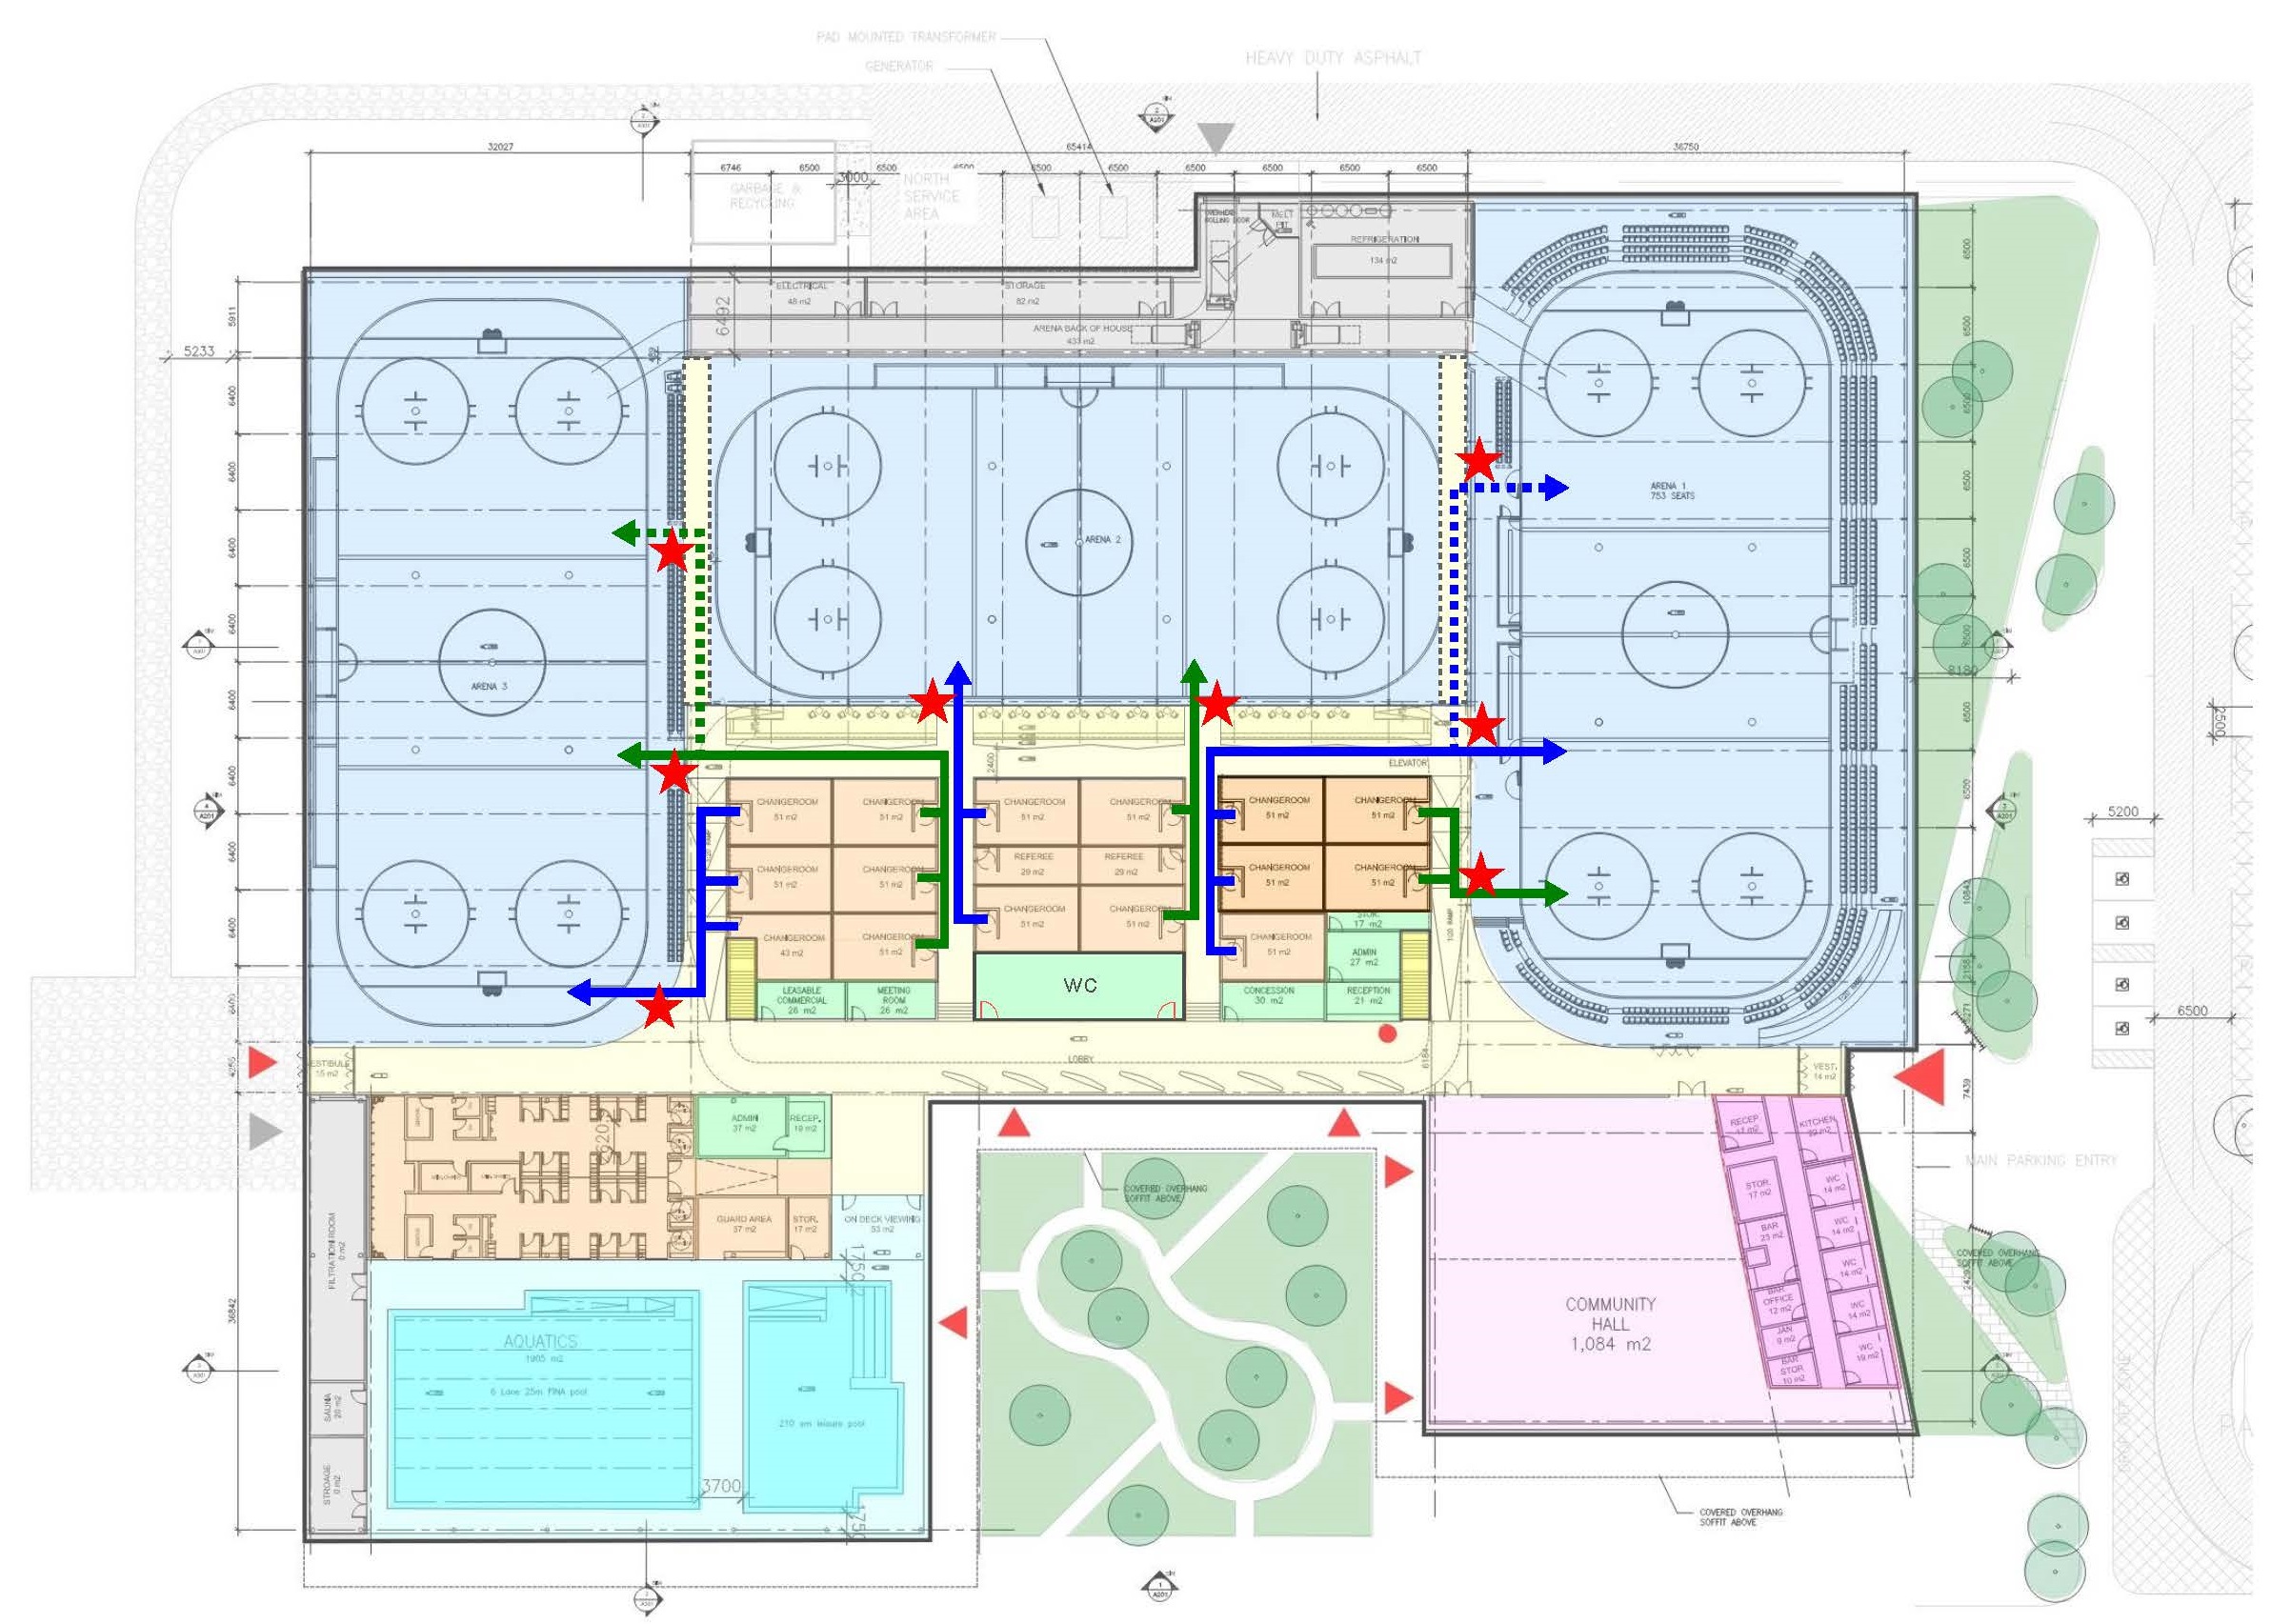 Diagram of the Recreation Complex